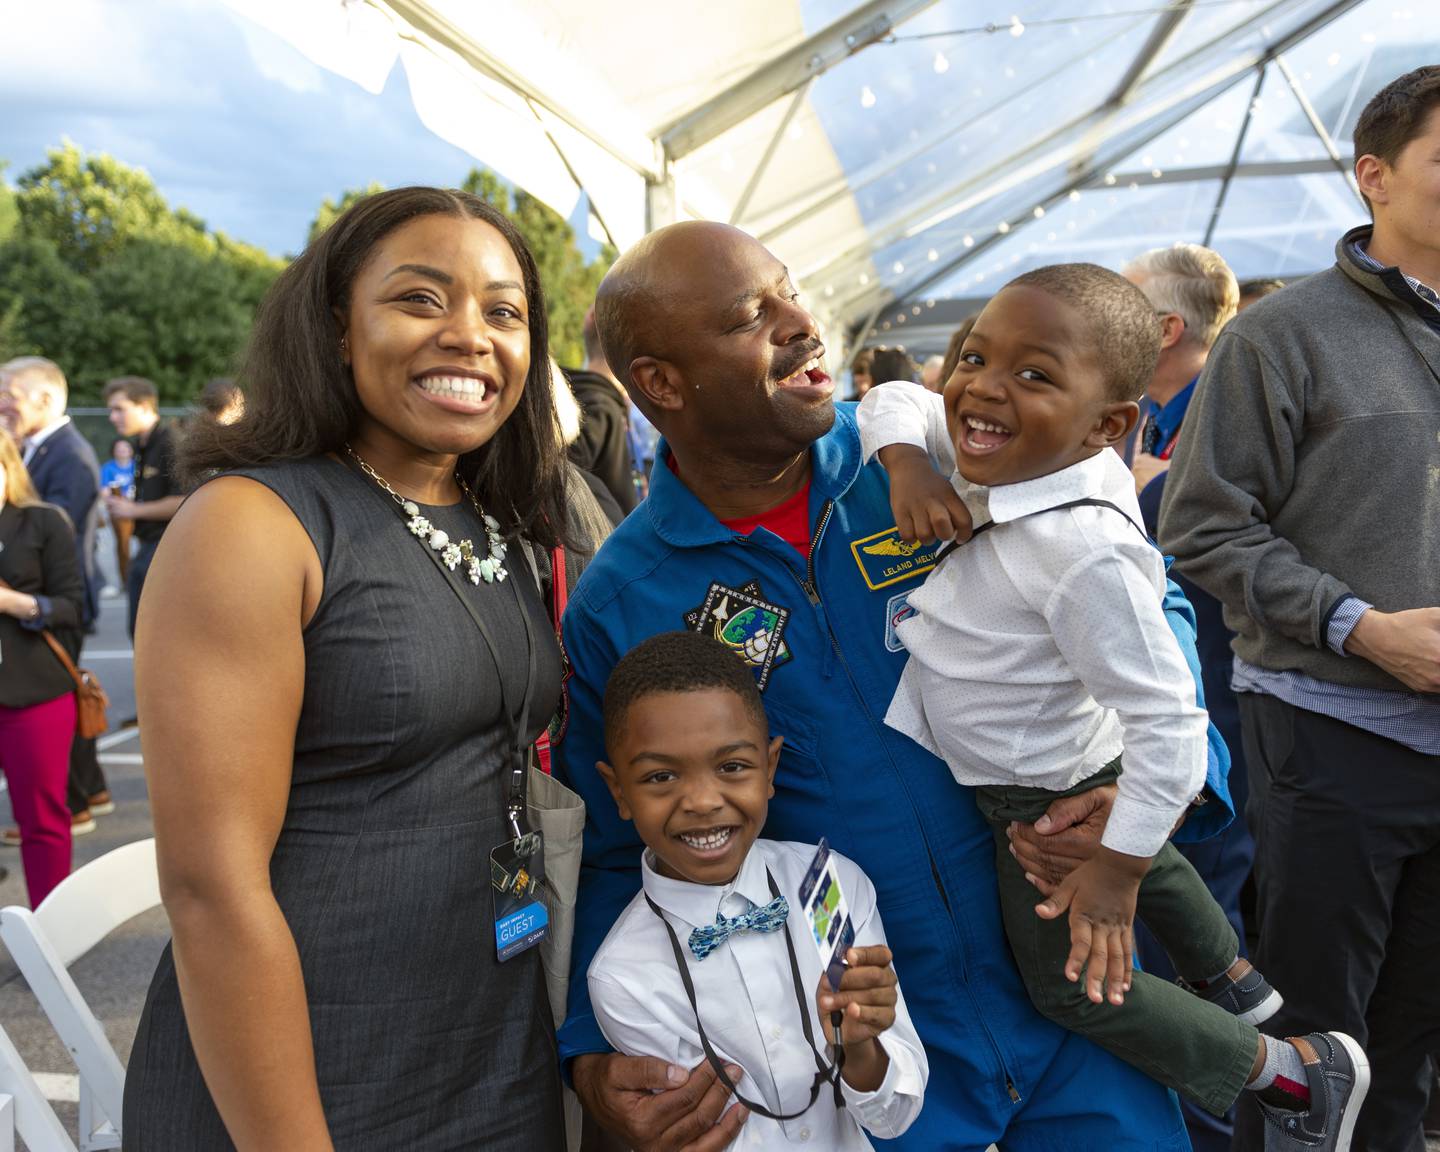 From left: Sade Newson, 32, Noah Newson, 6, Leland Melvin, 58, Aden Newson, 3, pose for a quick photo after opening remarks at the DART Impact Event held at the Johns Hopkins Applied Physics Lab, in Laurel, MD. Noah, an aspiring scientist, is shy meeting Leland Melvin the engineer, and retired NASA astronaut.